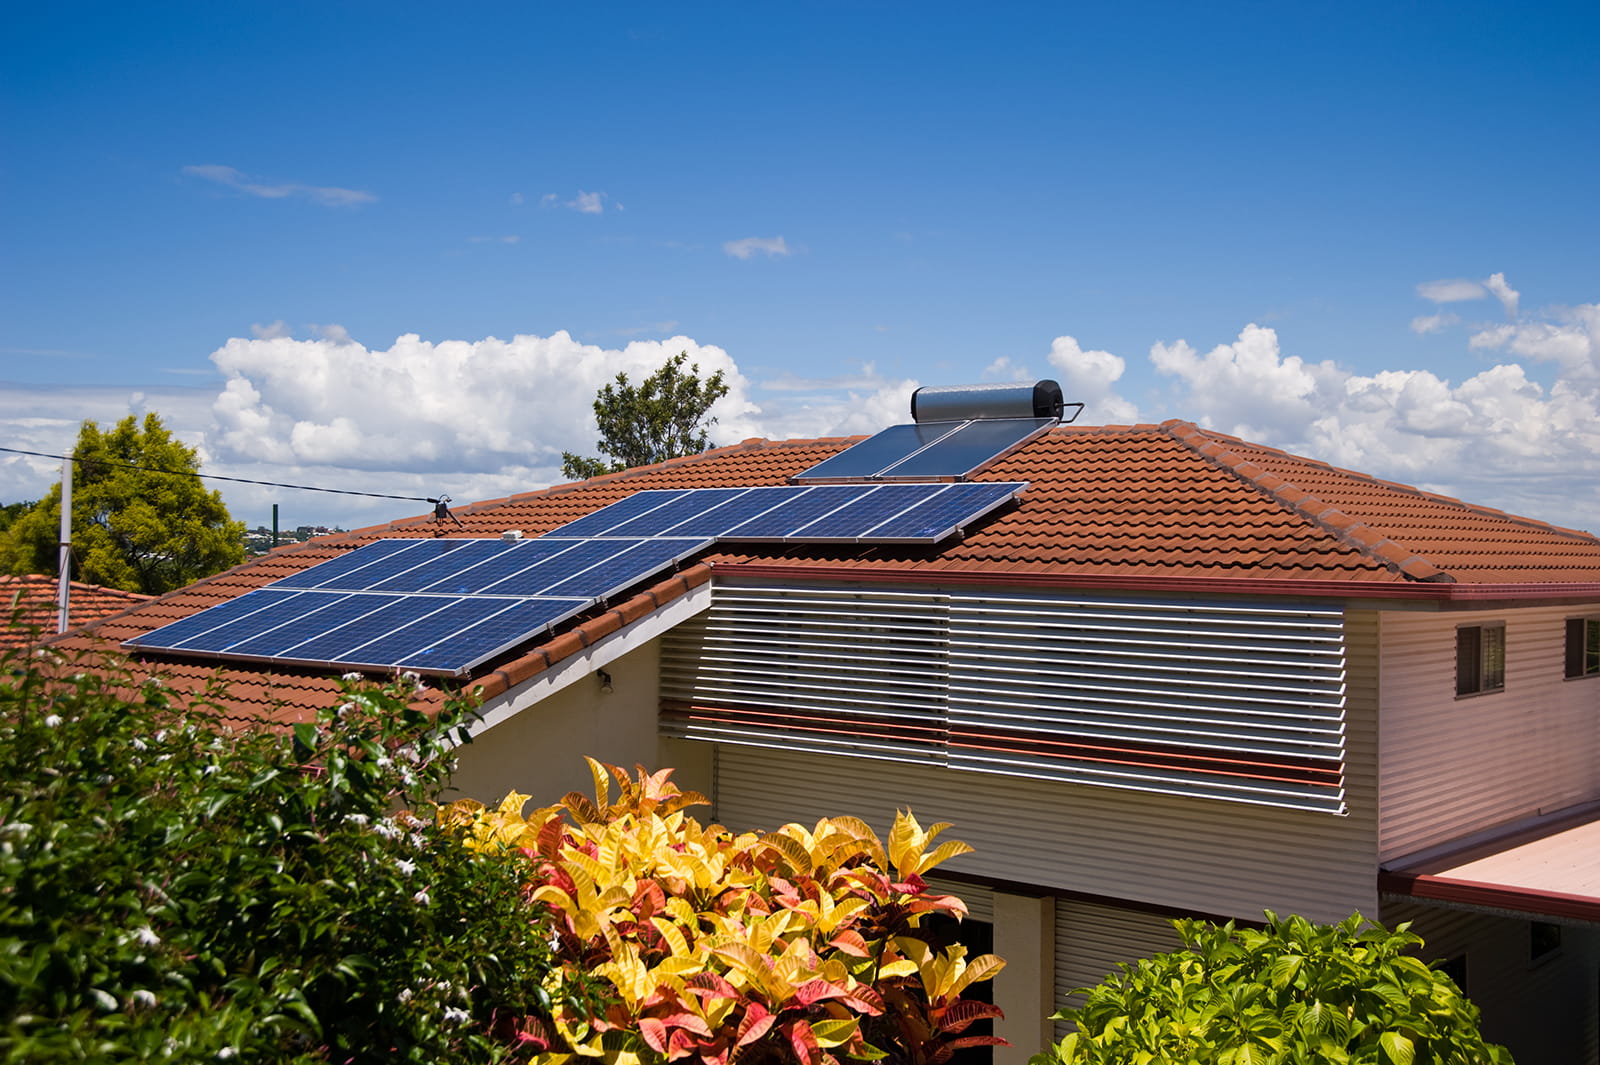 Residential home with solar panels